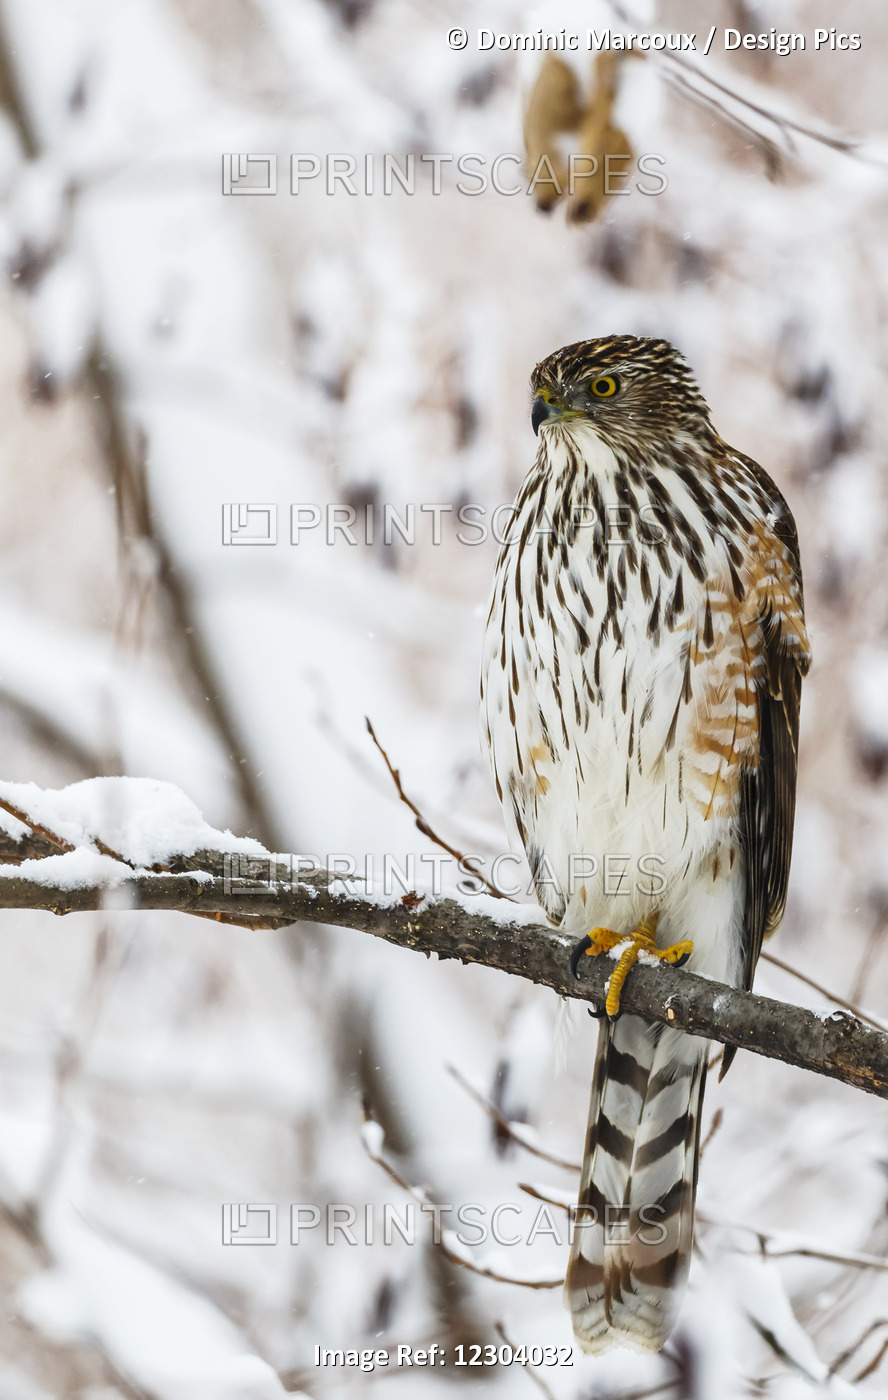 Portrait Of A Bird Sitting On A Tree Branch In Winter; Montreal, Quebec, Canada